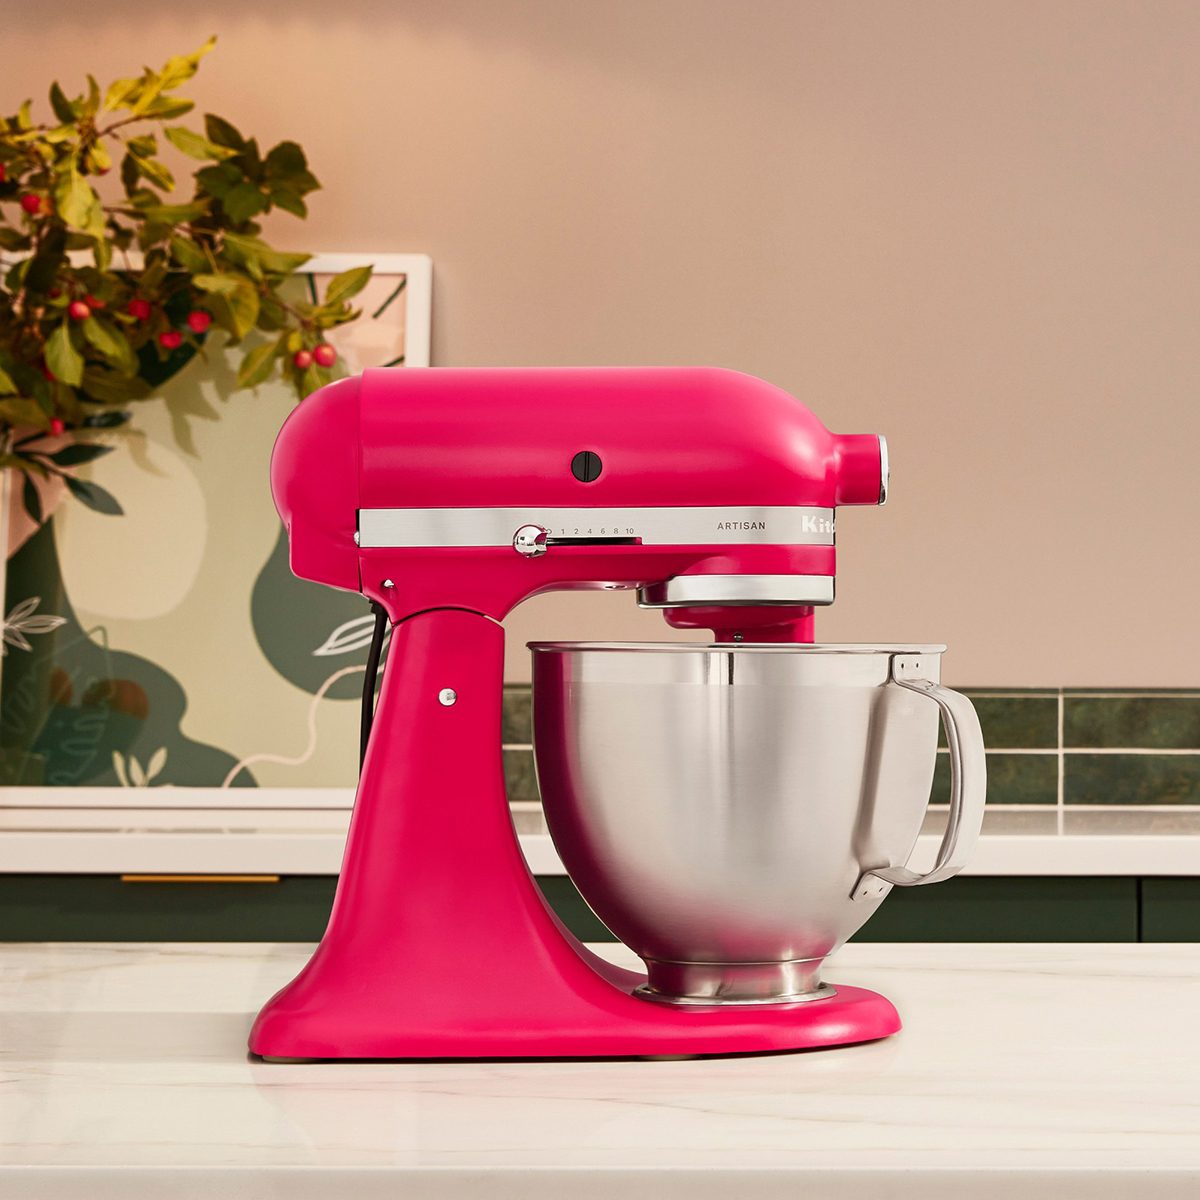 Barbiecore Is the Hot Pink Home Trend That Will Be Everywhere in 2023